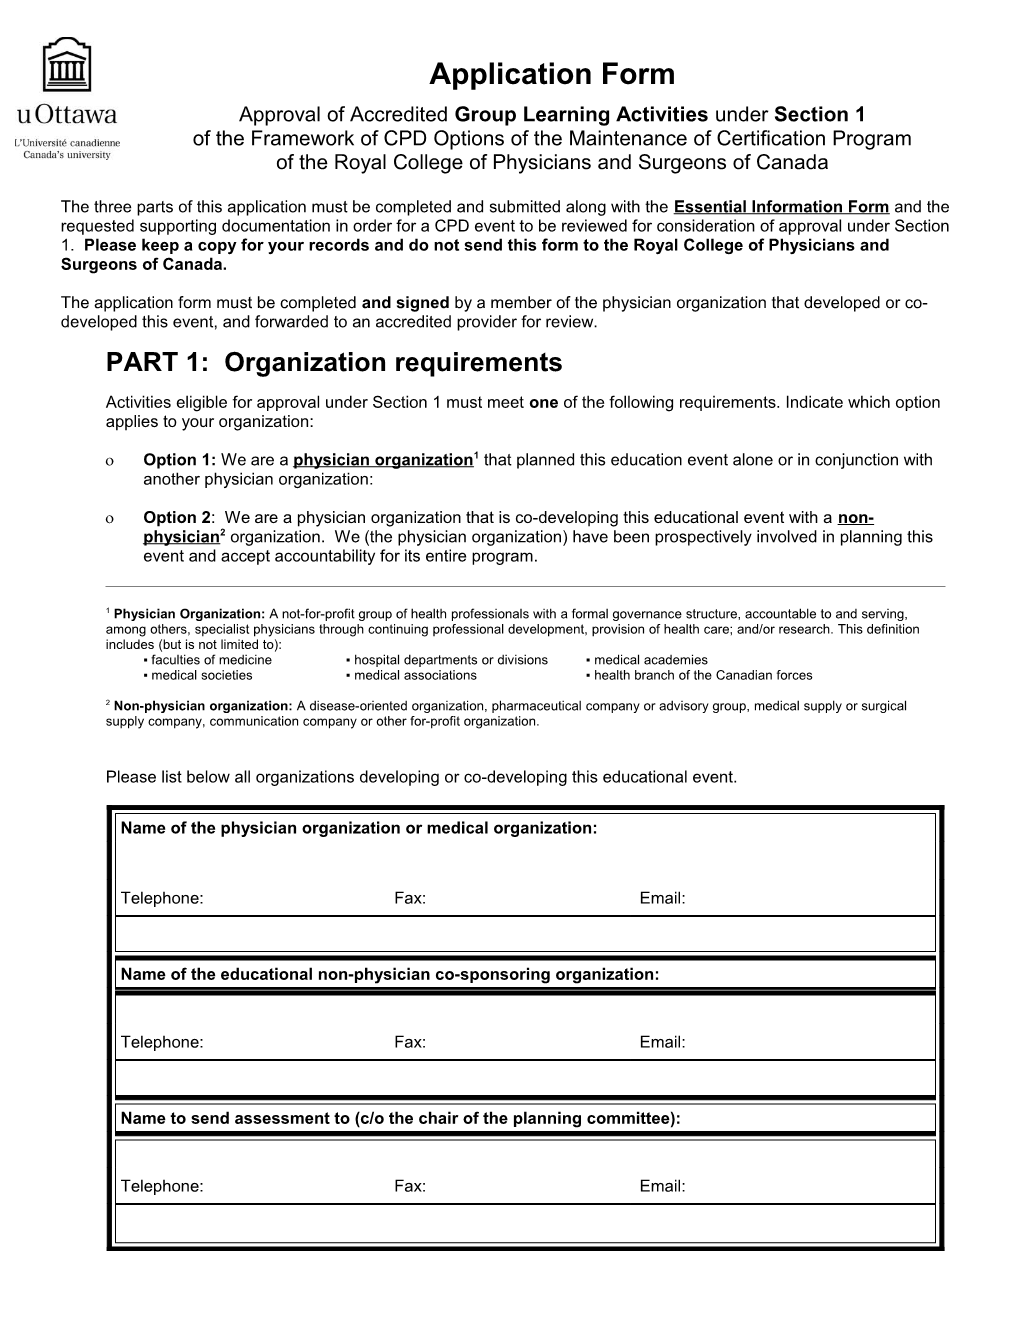 Generic Application Form s1